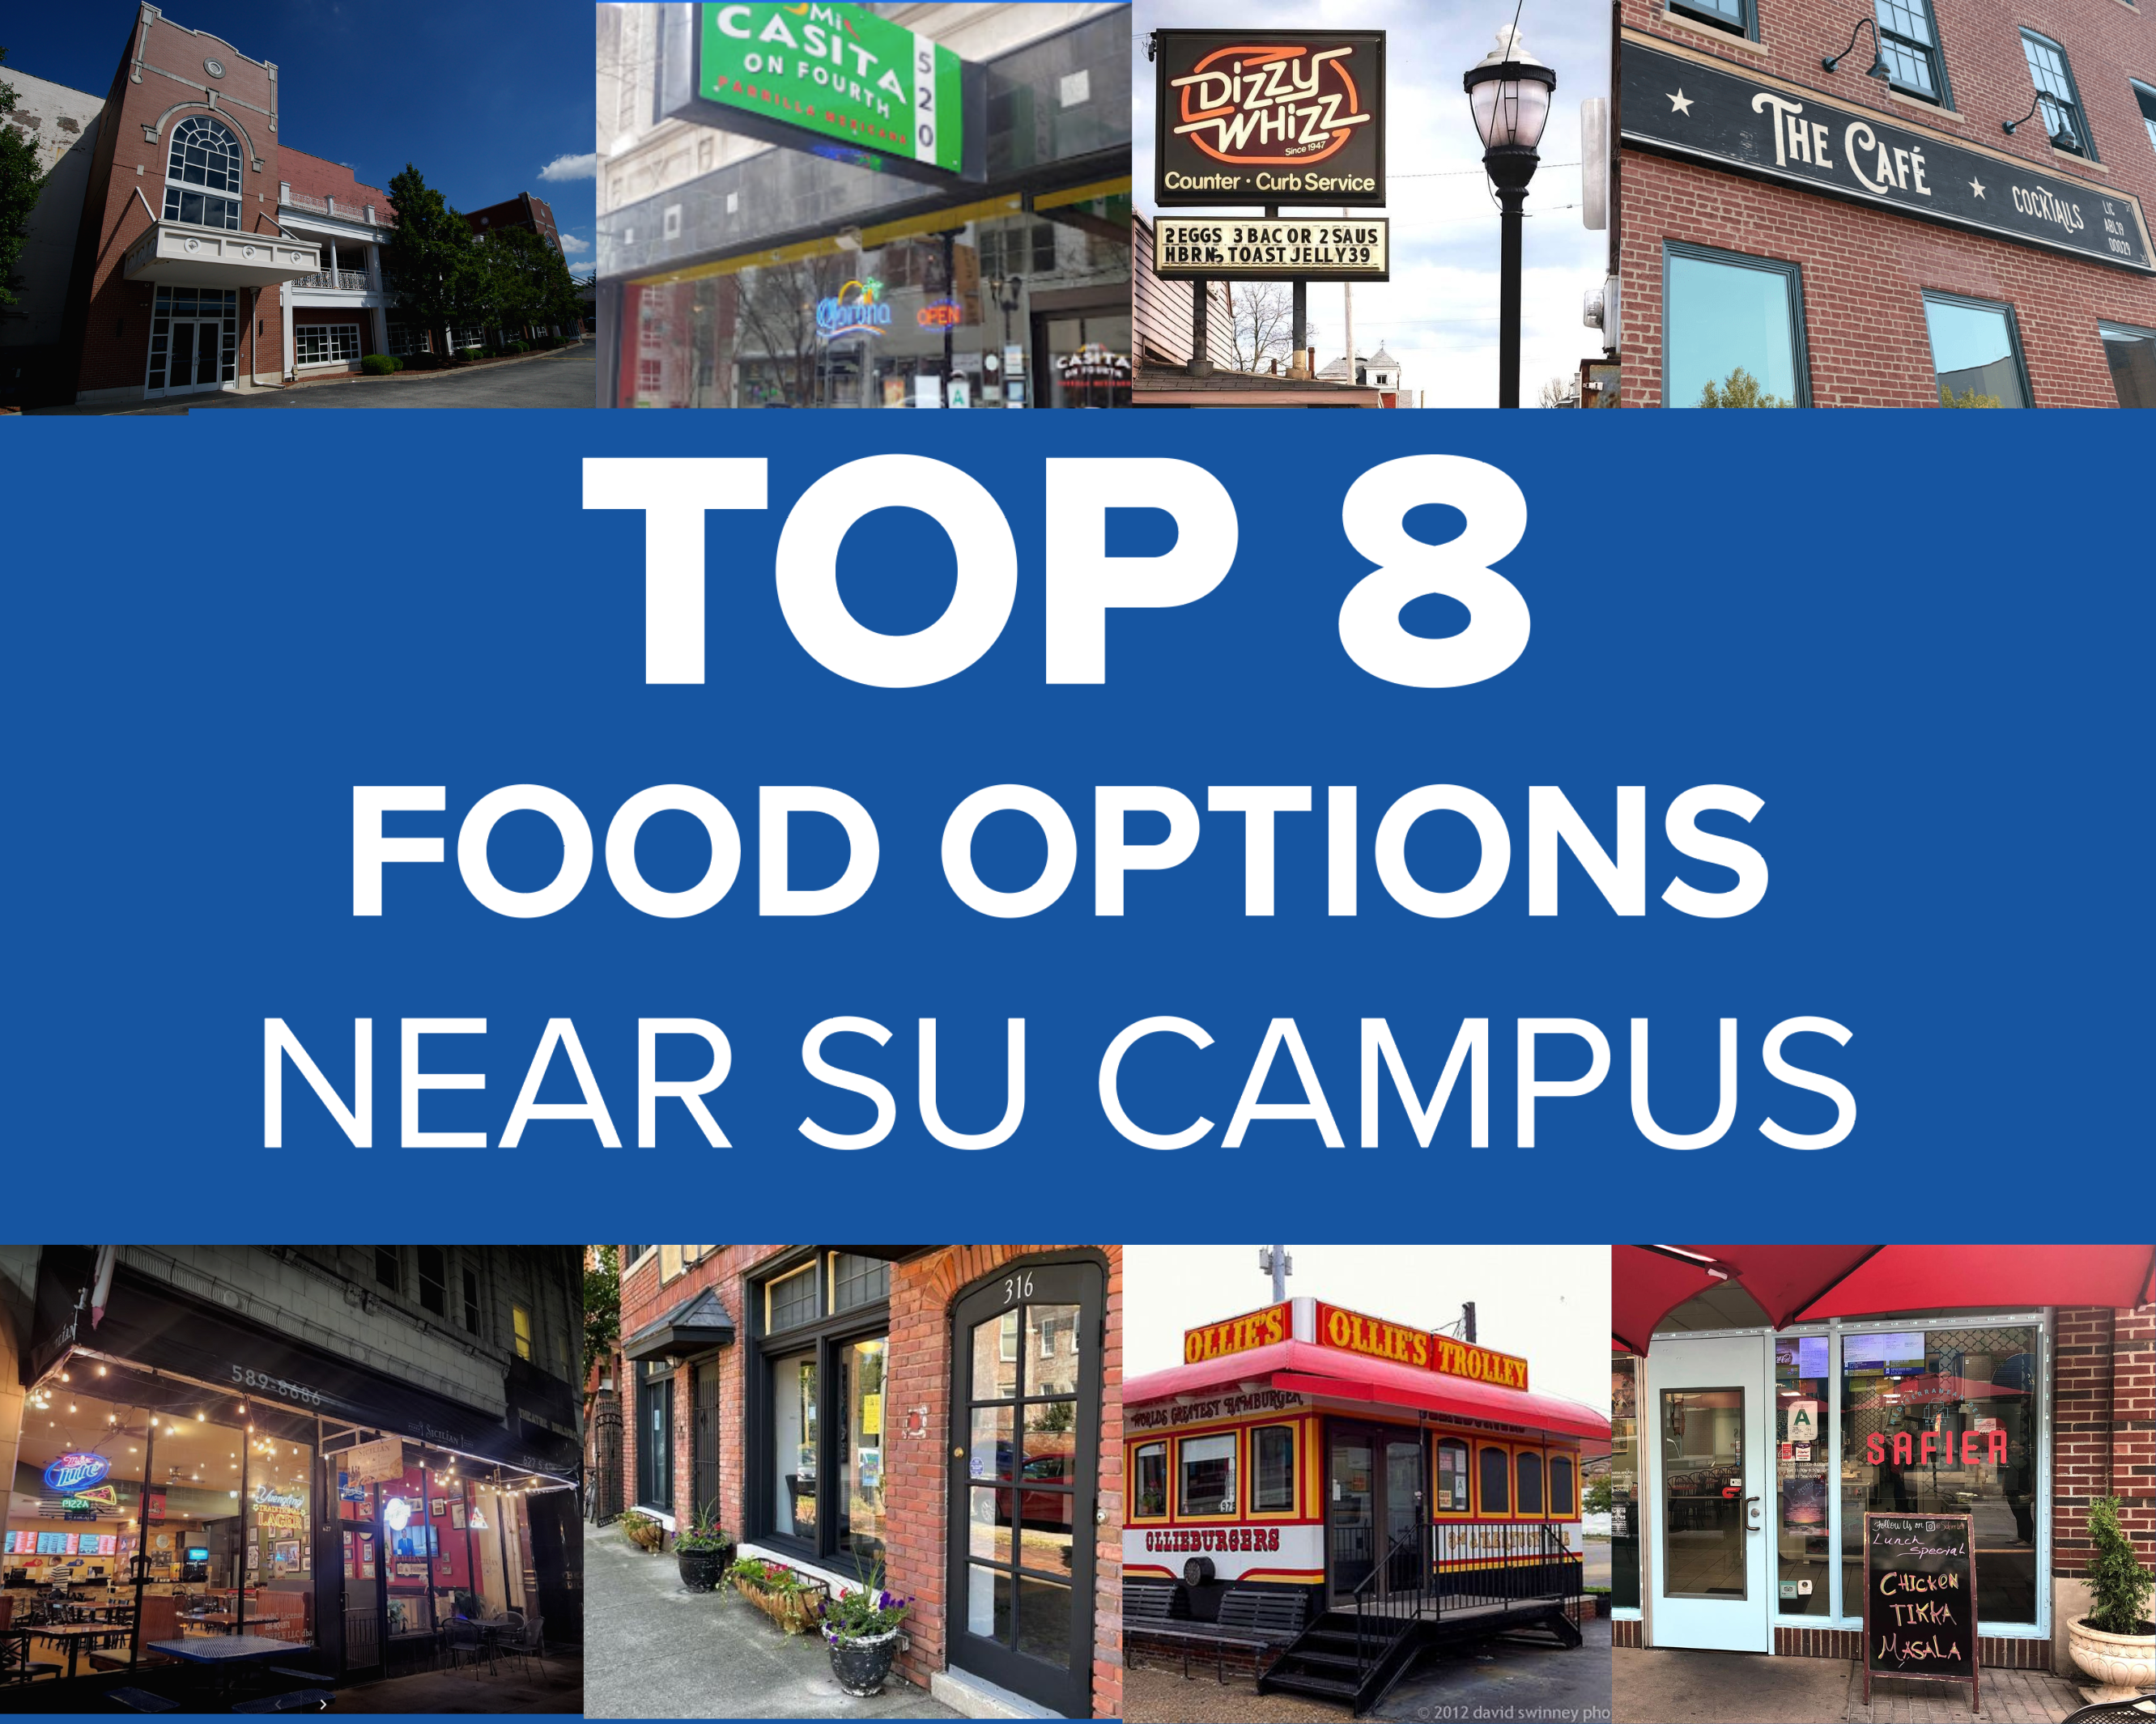 Top 8 Dining and Food Options Close to Spalding University’s Campus